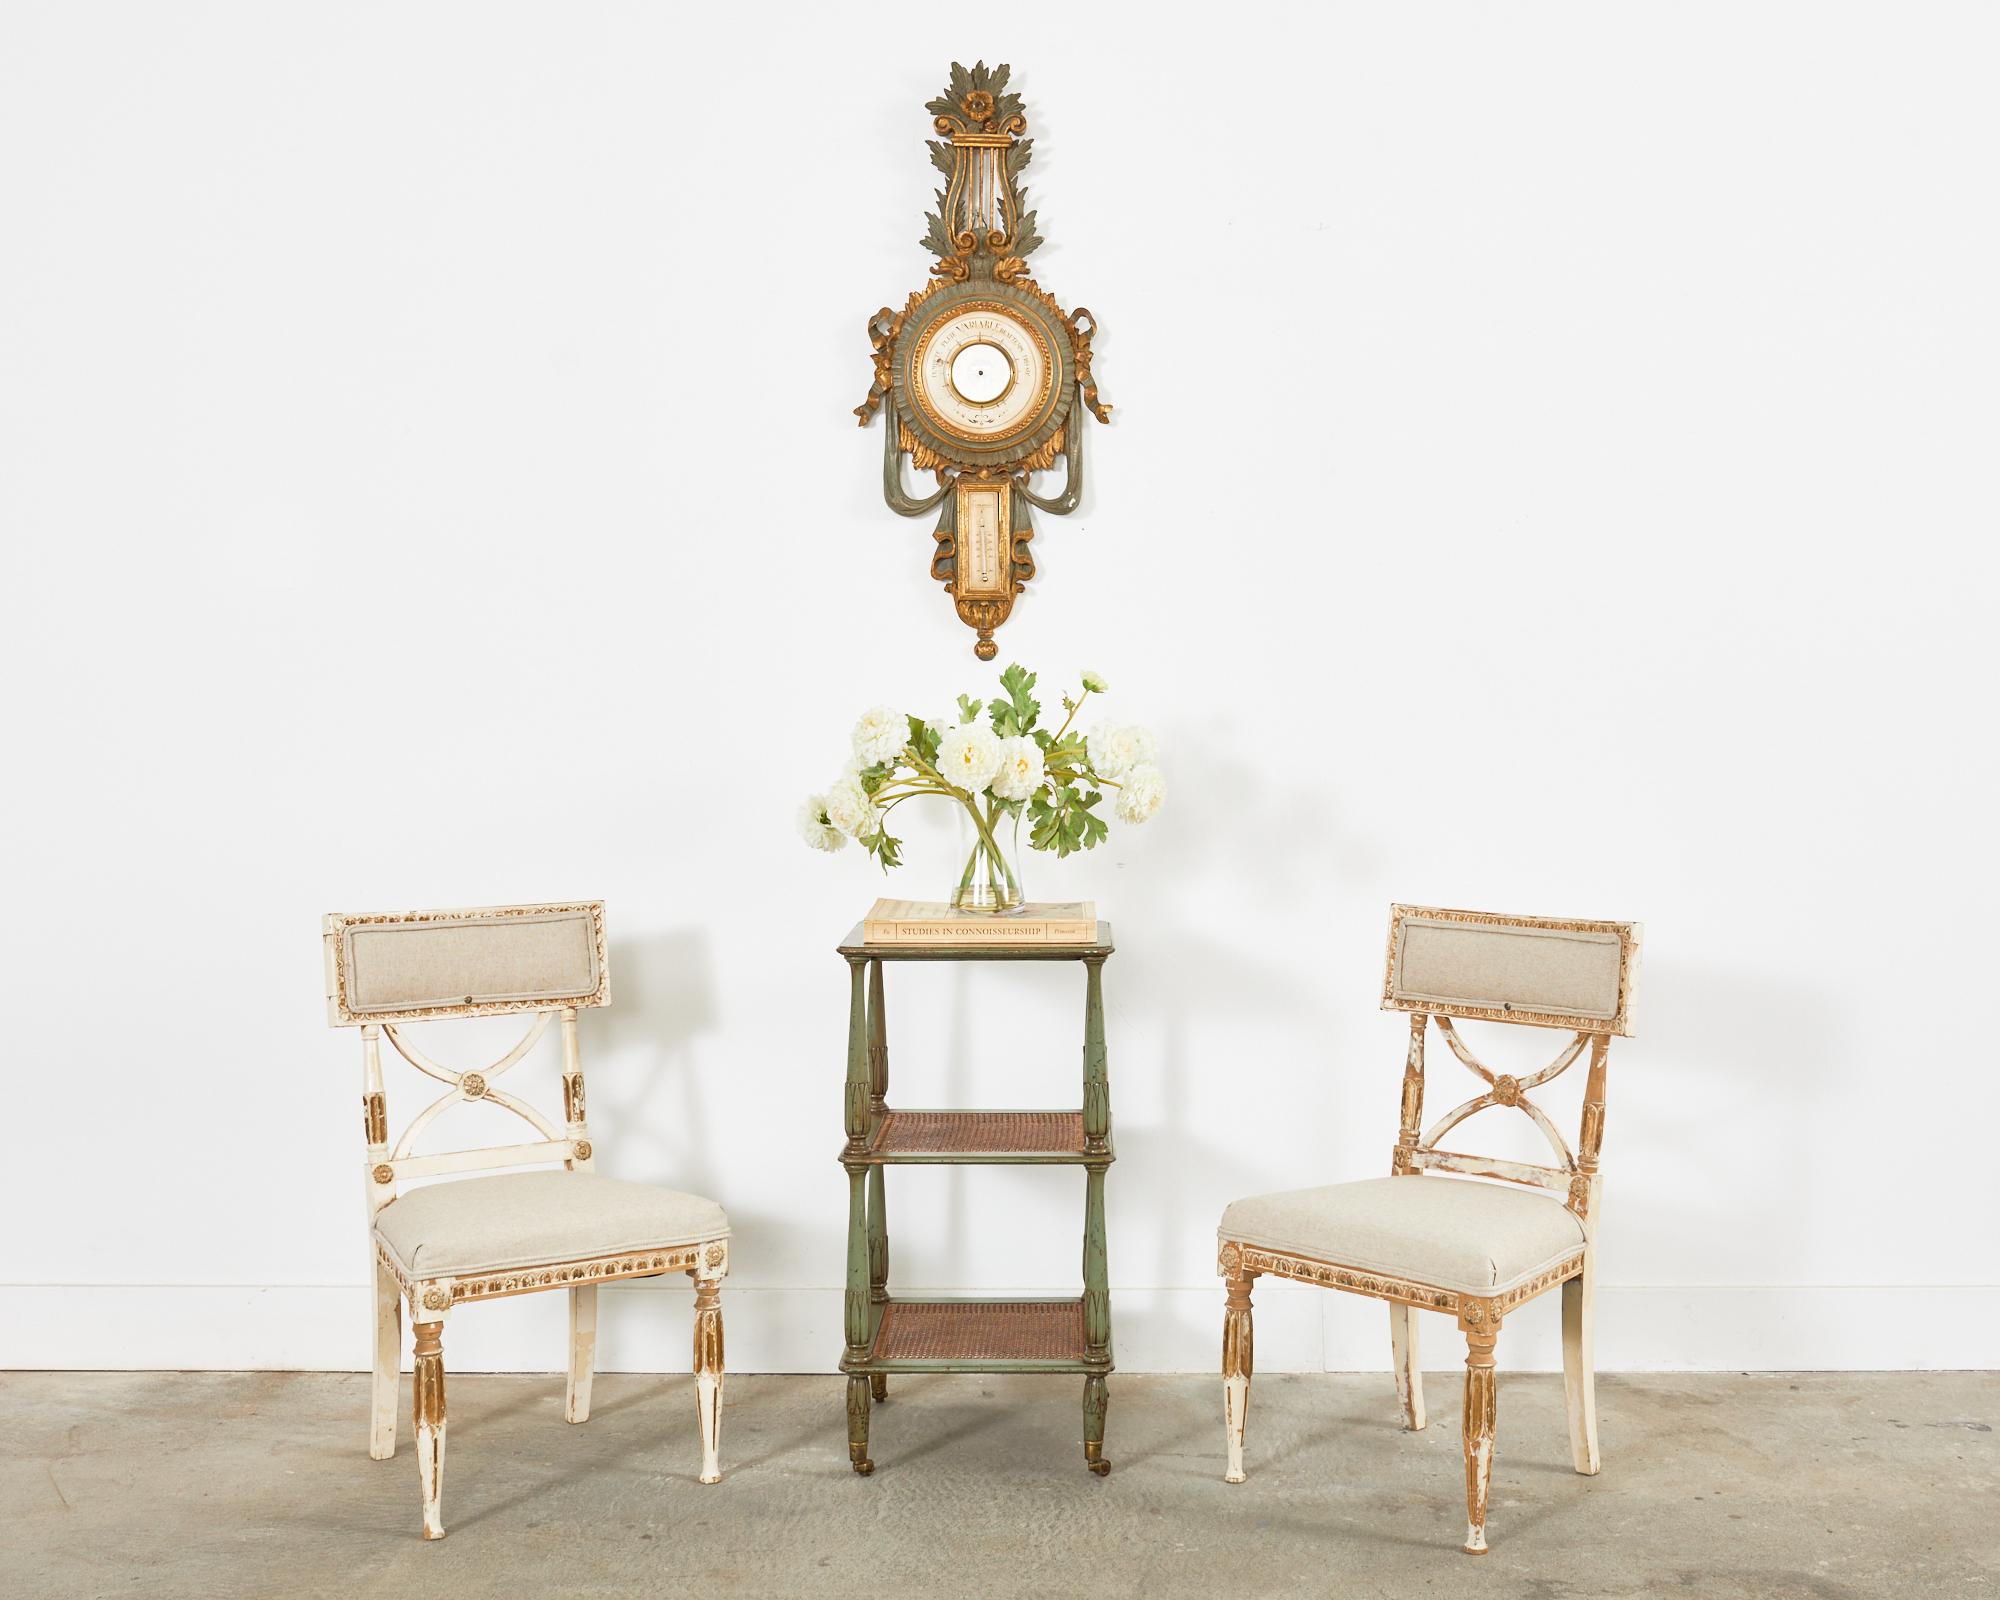 Gorgeous pair of Swedish hall chairs or dining chairs made in the 18th century neoclassical Gustavian taste. The beech frames feature an intentionally distressed painted finish with parcel gilt accents. The klismos style tablet back is supported by